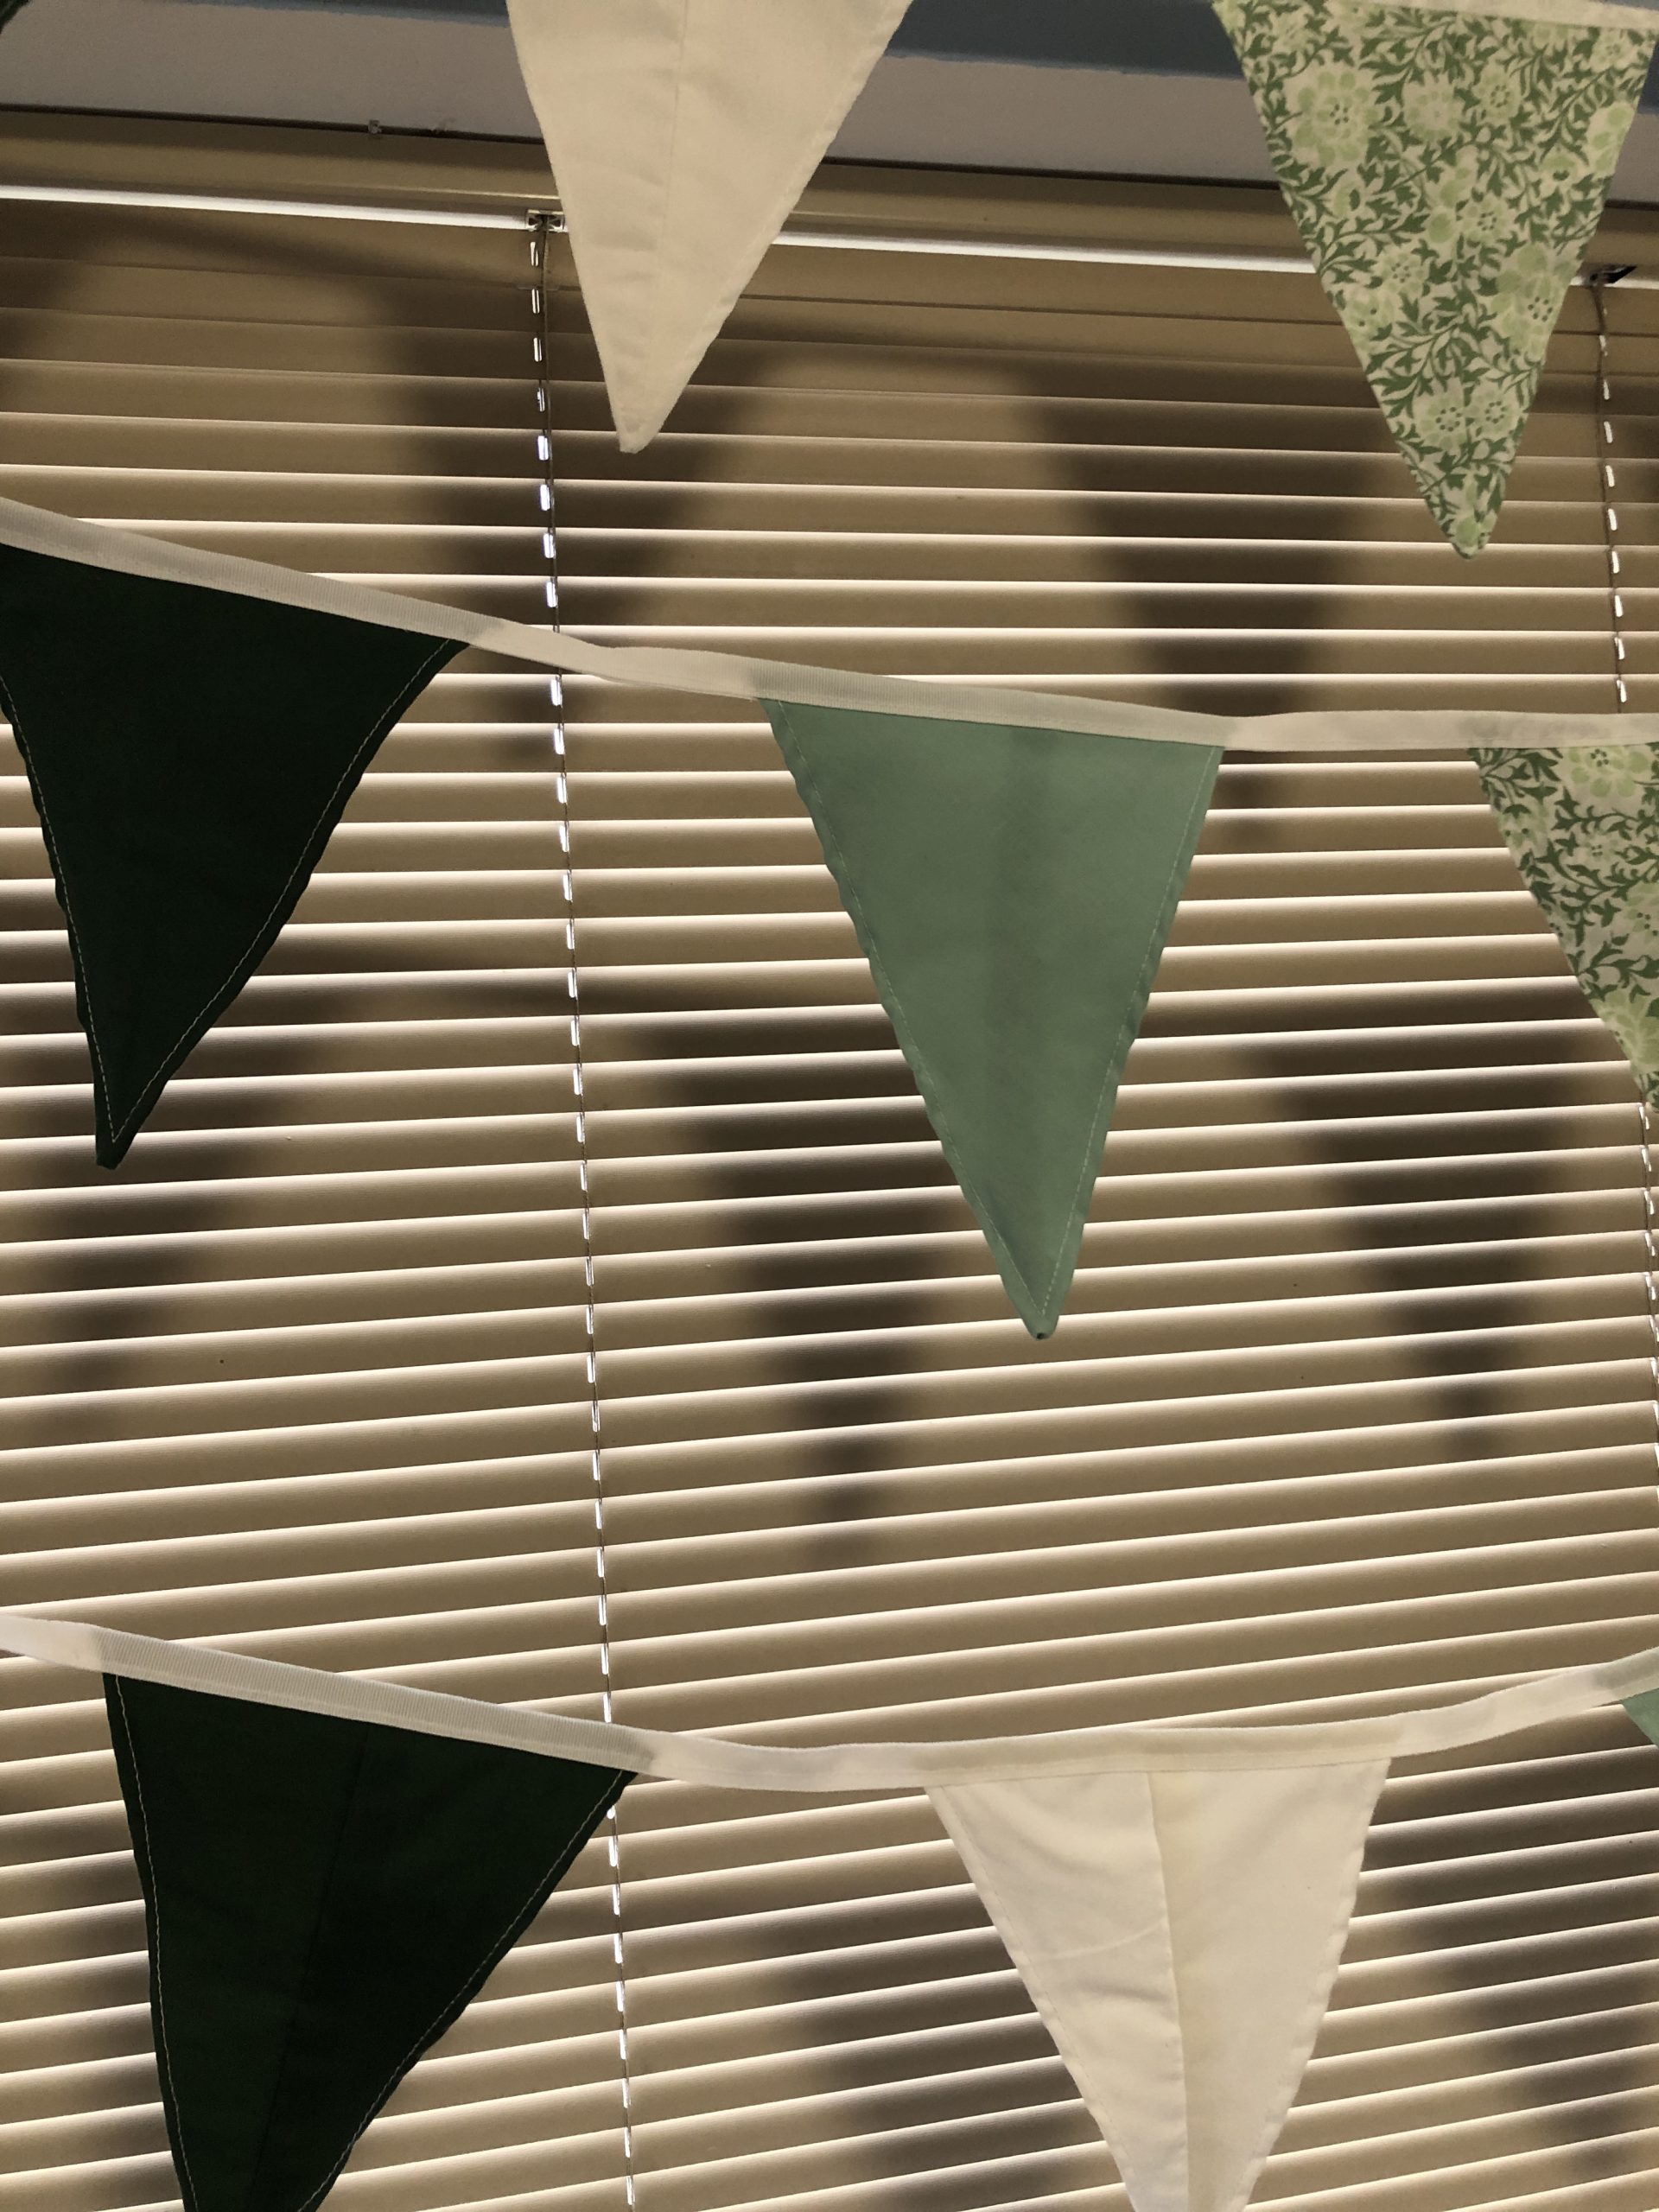 Fabric bunting made from waste fabric in greens and white.